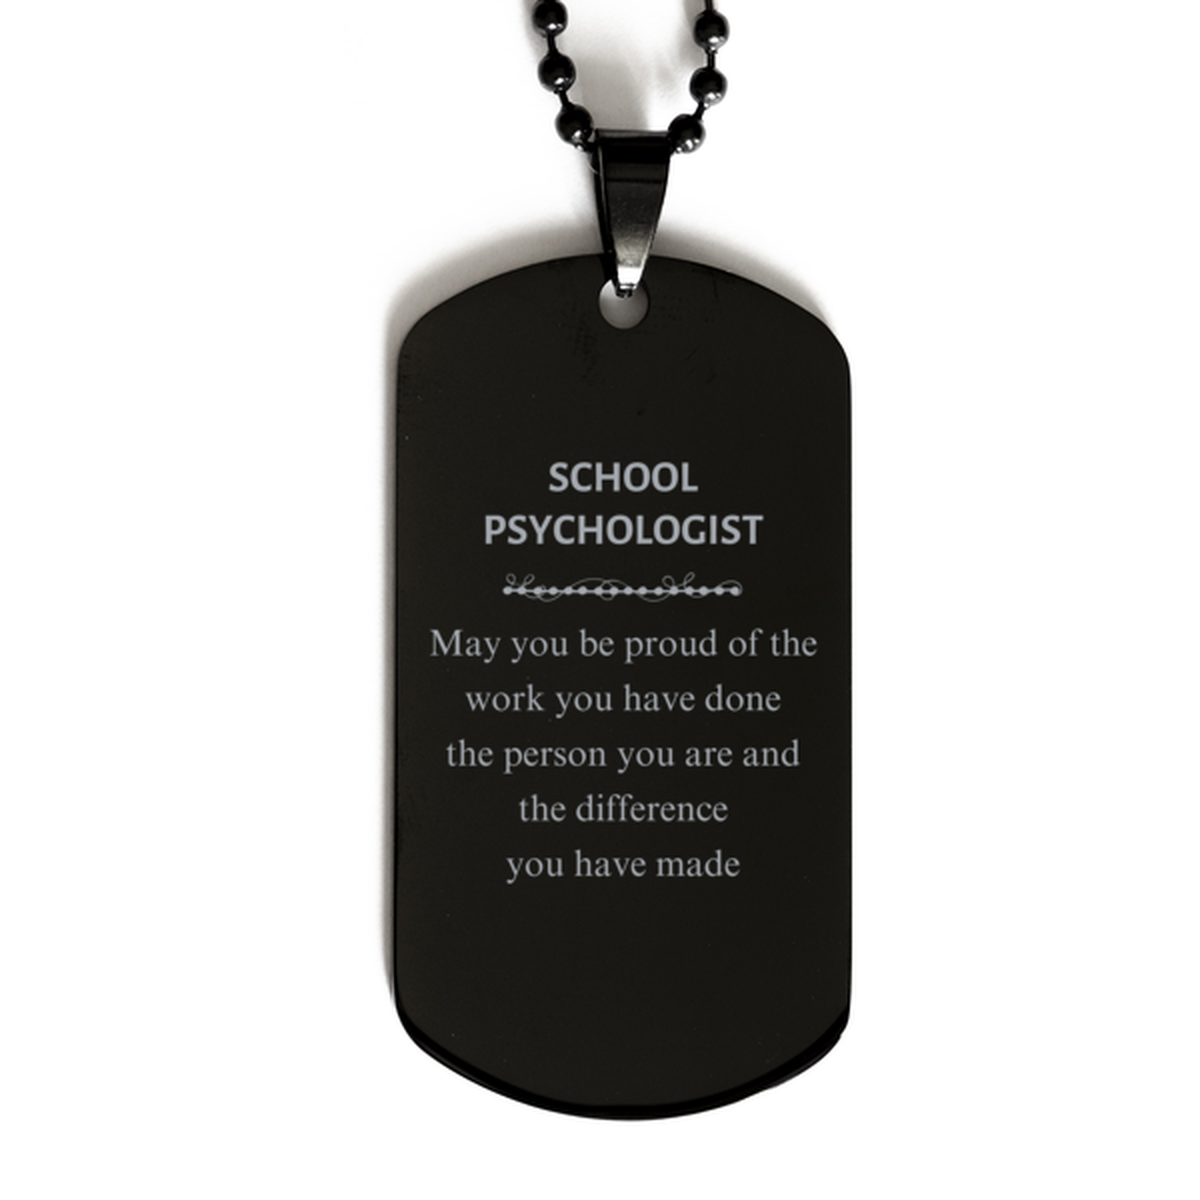 School Psychologist May you be proud of the work you have done, Retirement School Psychologist Black Dog Tag for Colleague Appreciation Gifts Amazing for School Psychologist